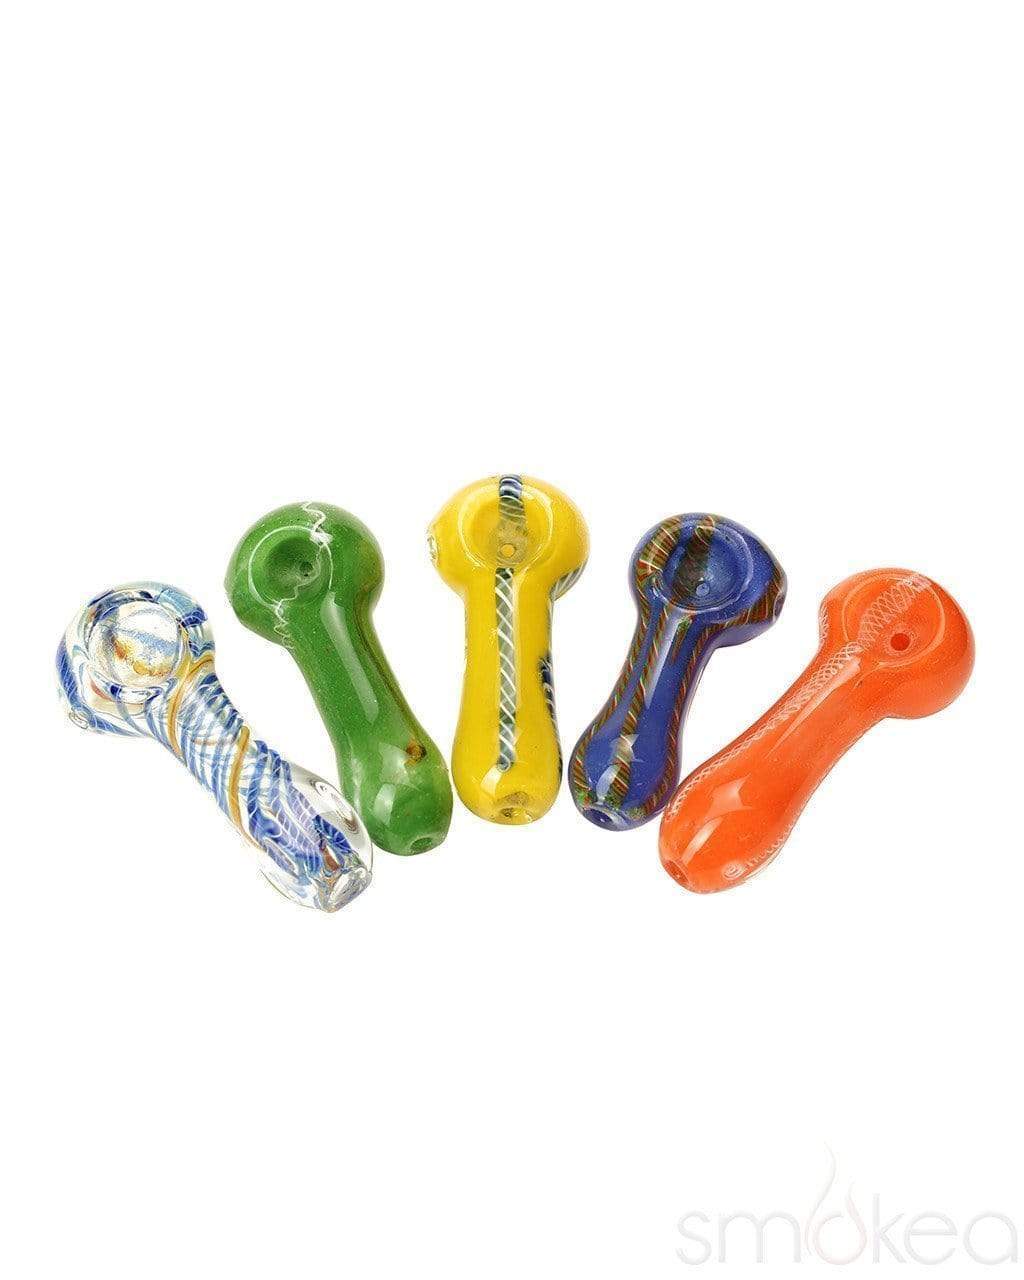 Smoking Pipes For Sale - Hand Pipes & Glass Blunts